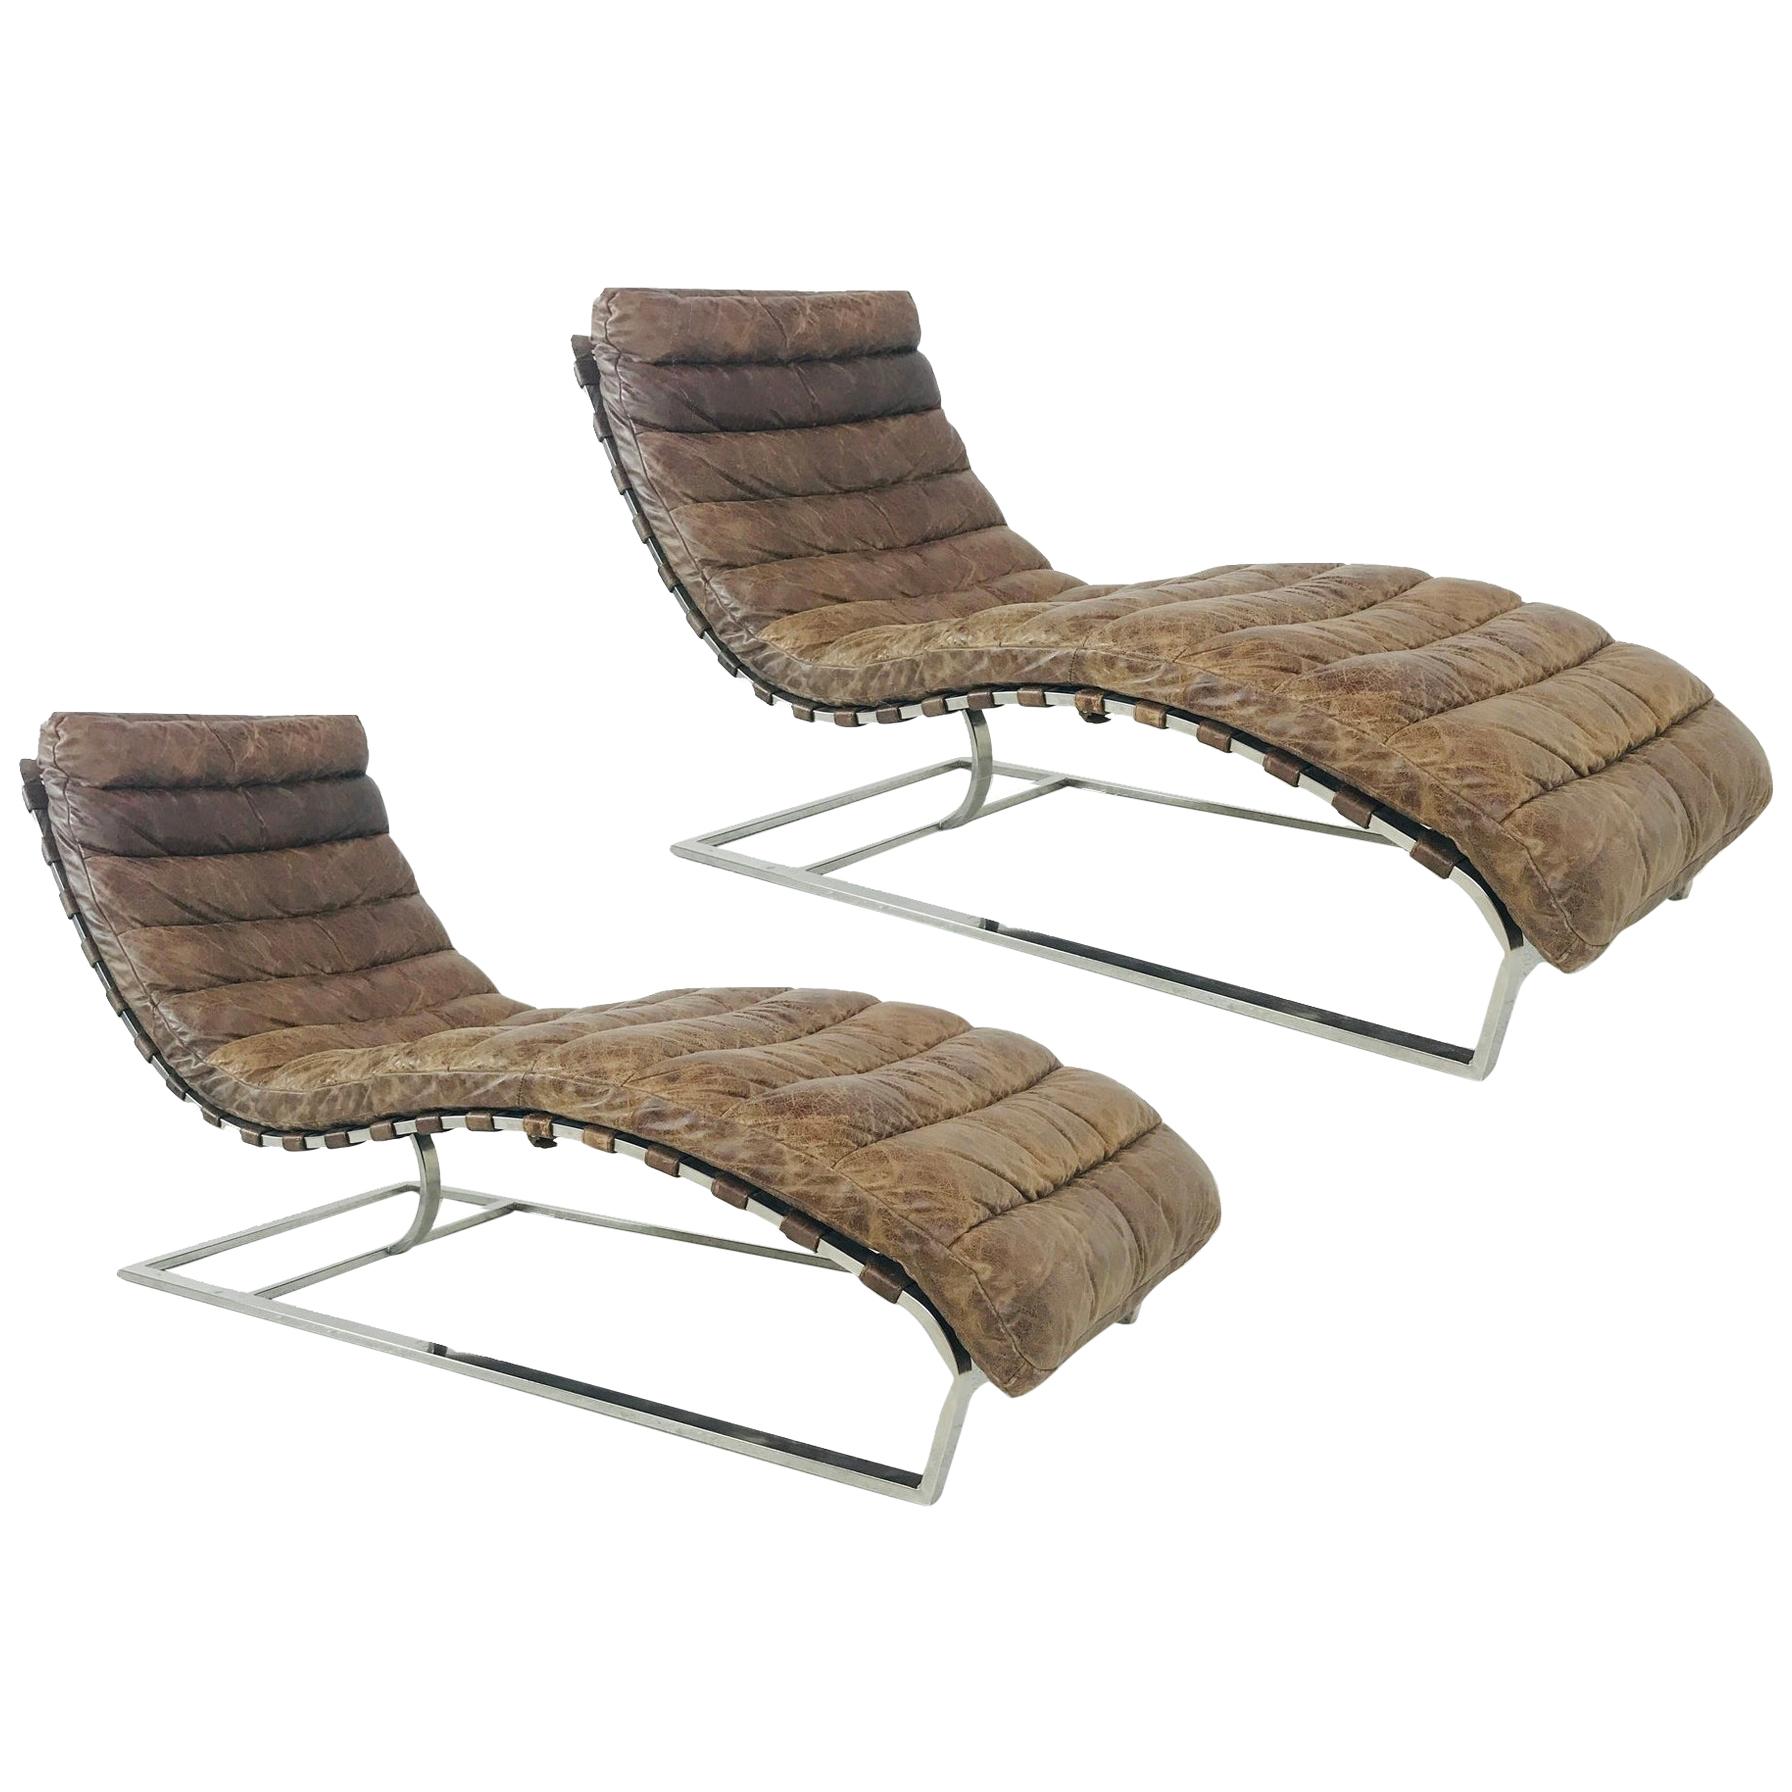 Pair of Oviedo Distressed Leather Chaise Lounges